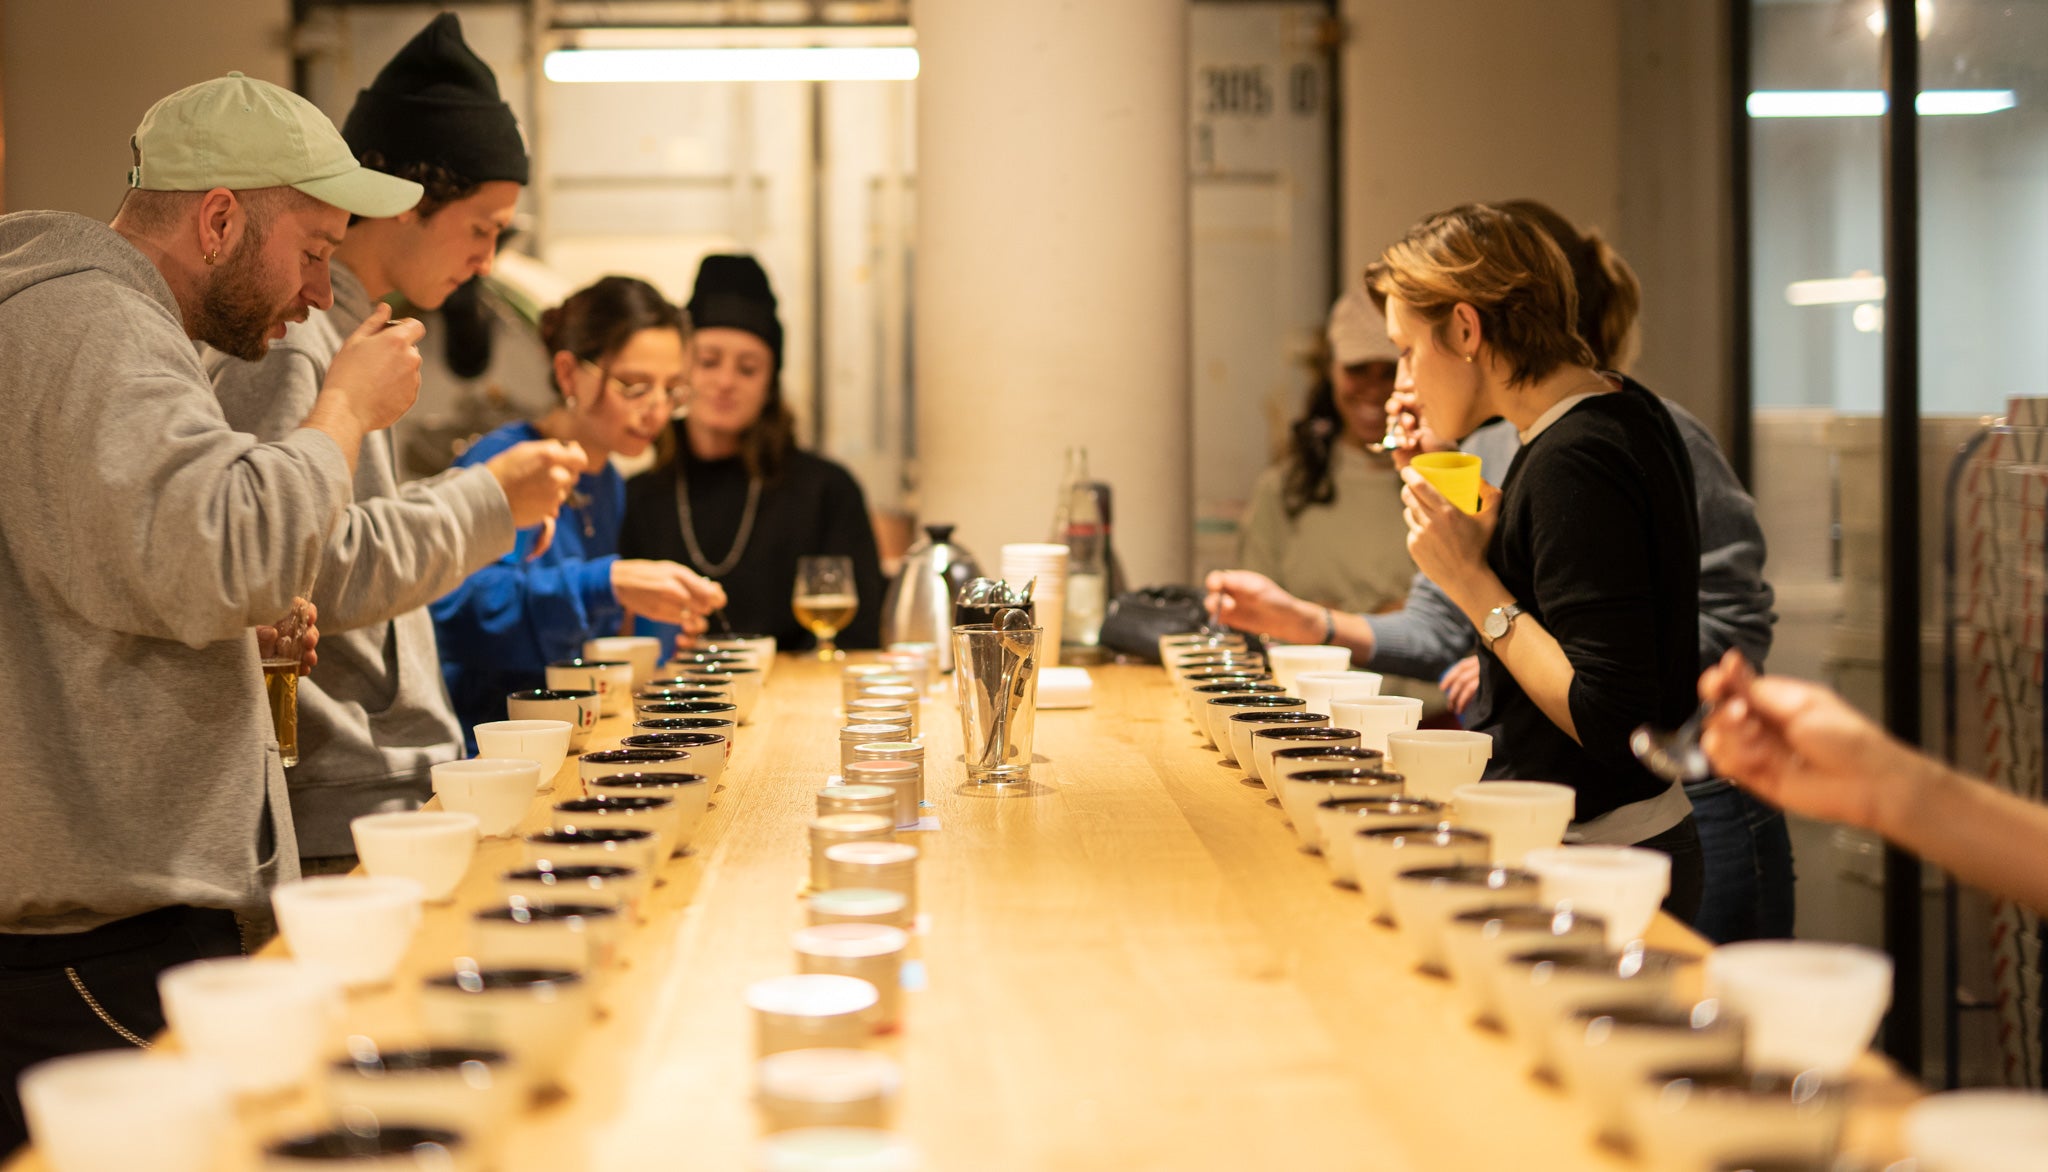 Cupping in the lab of 19grams Alex cafe and Roastery at Alexanderplatz in Berlin